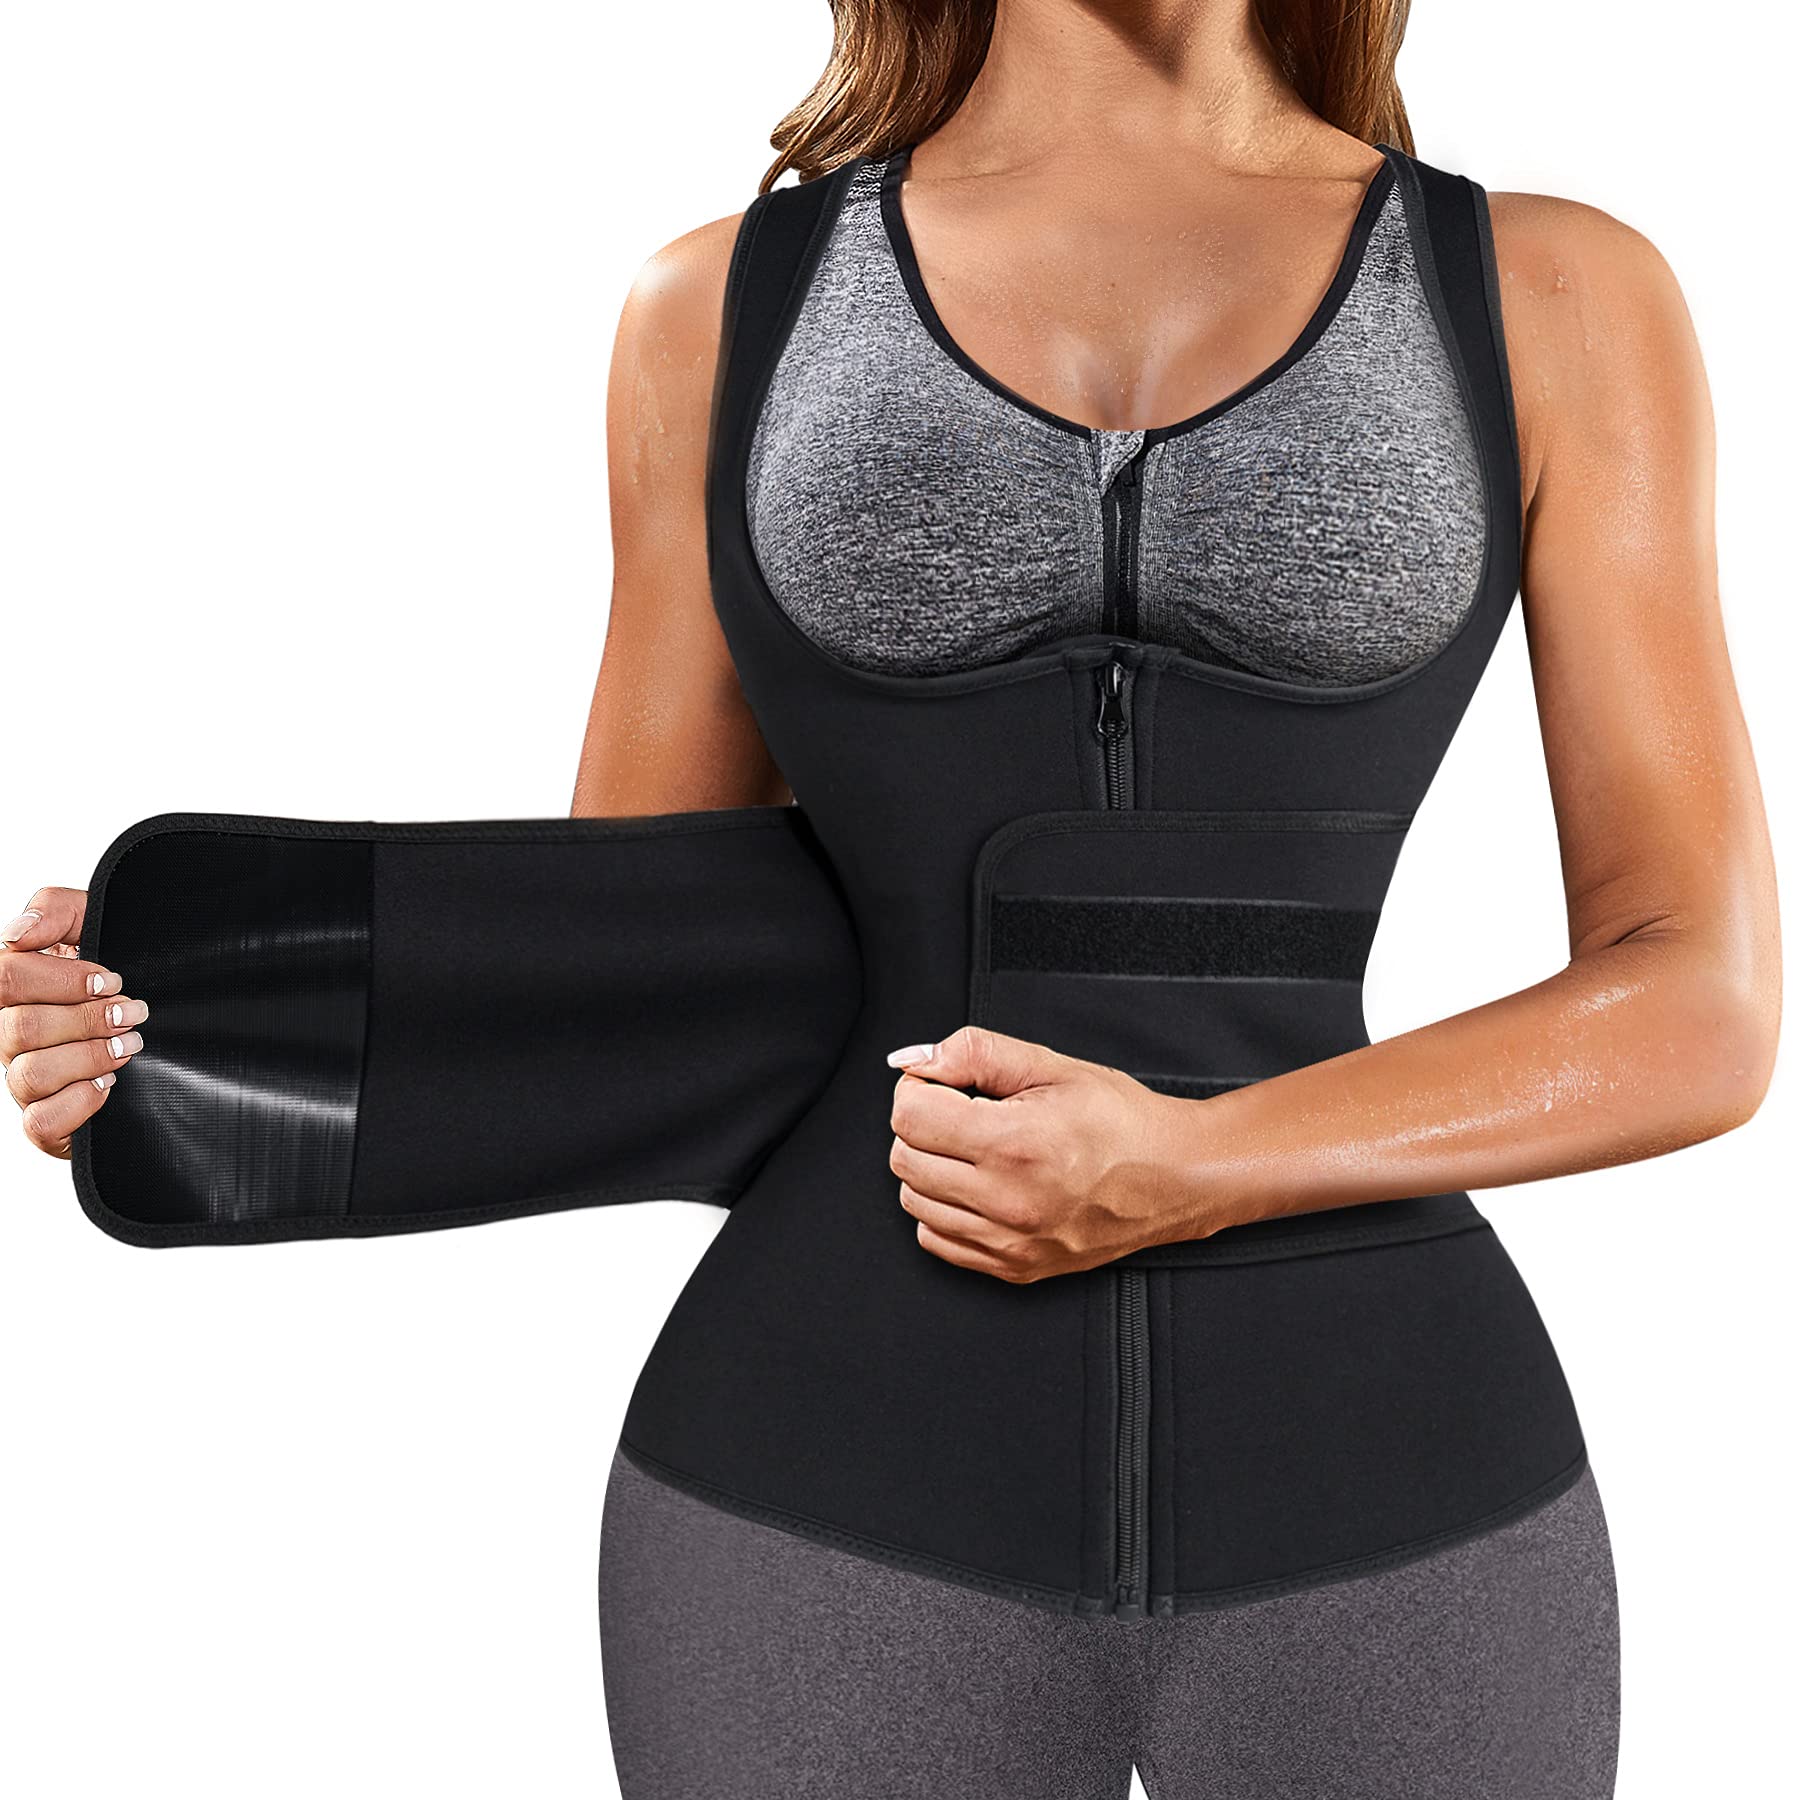 Summer Body Shaper C&A For Women Slimming Waist Trainer Vest With